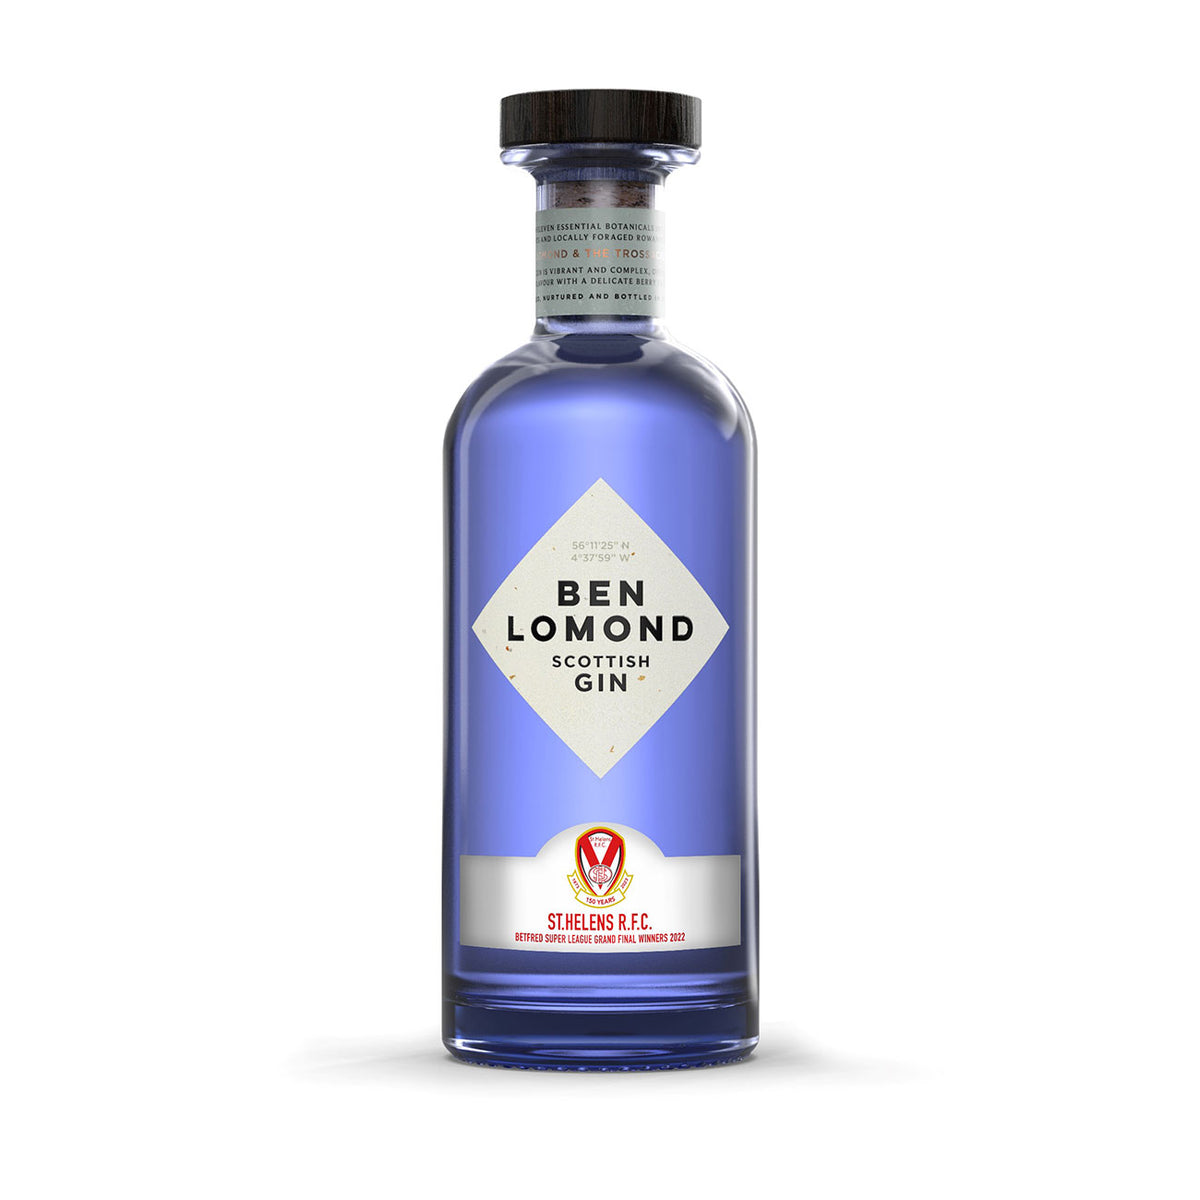 St. Helens. R.F.C. Special Edition Gin